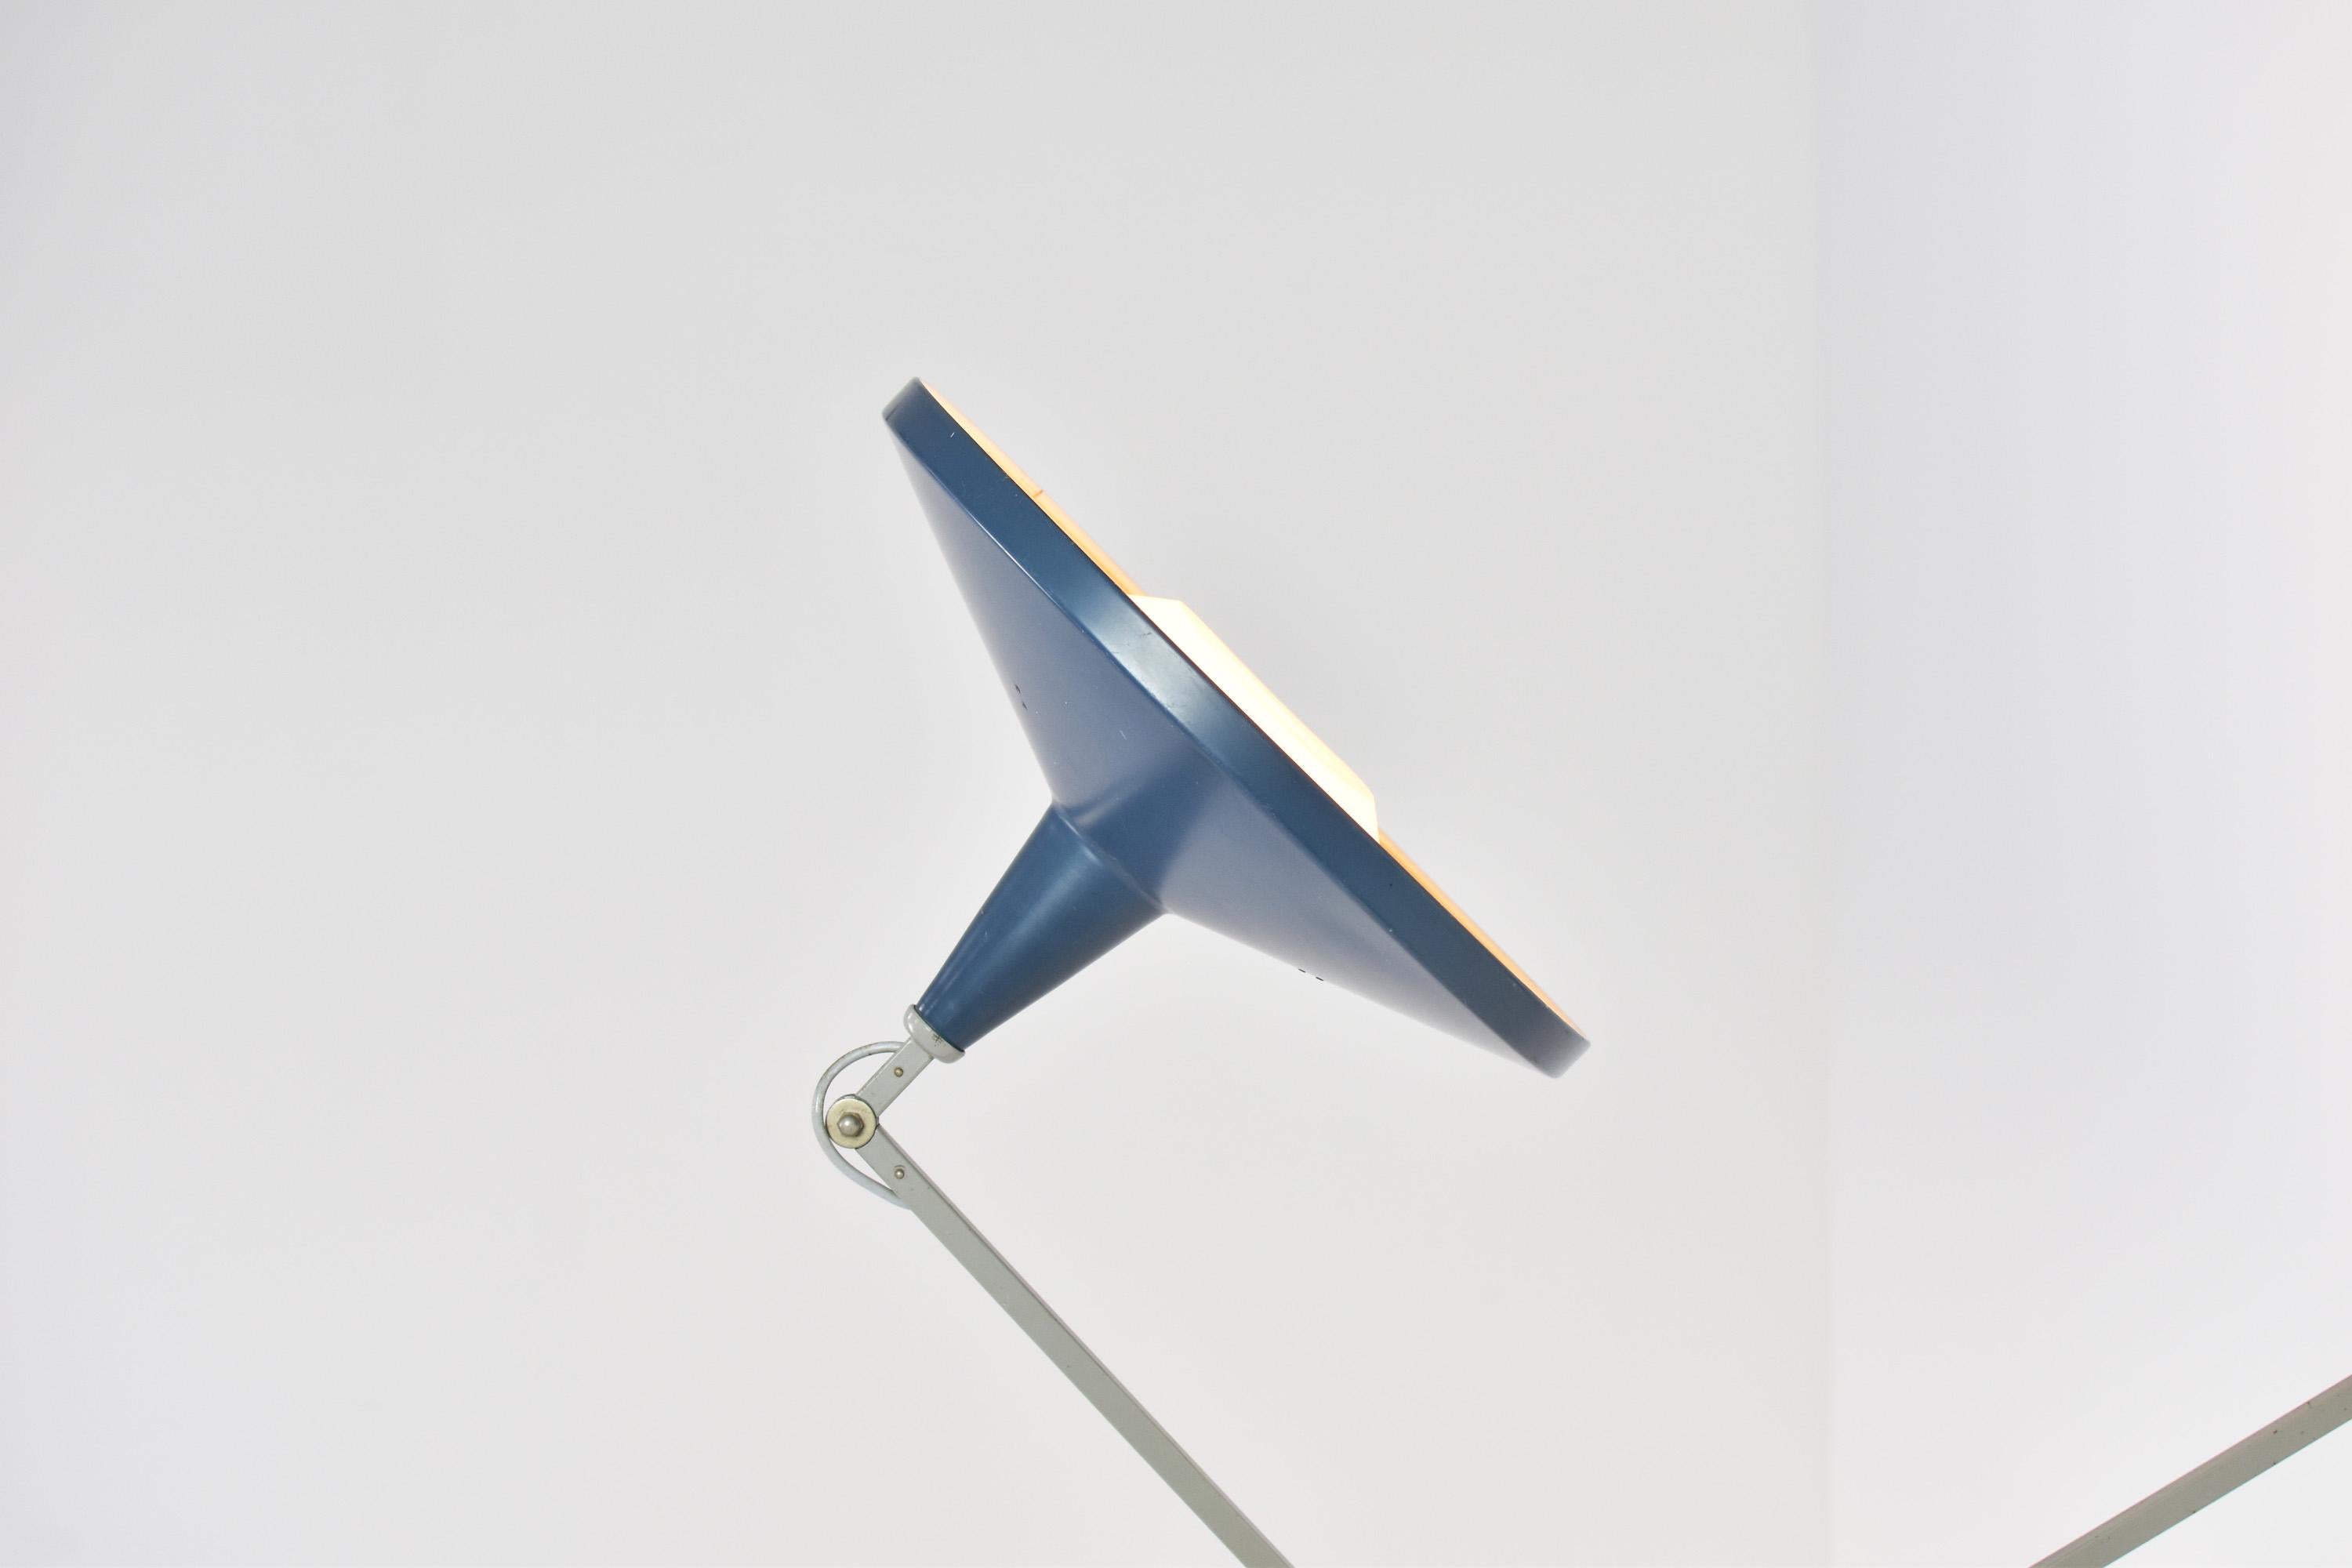 Early edition of this wall mounted ‘Panama’ lamp by Wim Rietveld for Gispen, The Netherlands, 1955. Model No. 4050 with its original blue lacquered shade and comes with the original (!) diffuser (which is missing in 99 of 100 lamps). This lamp can